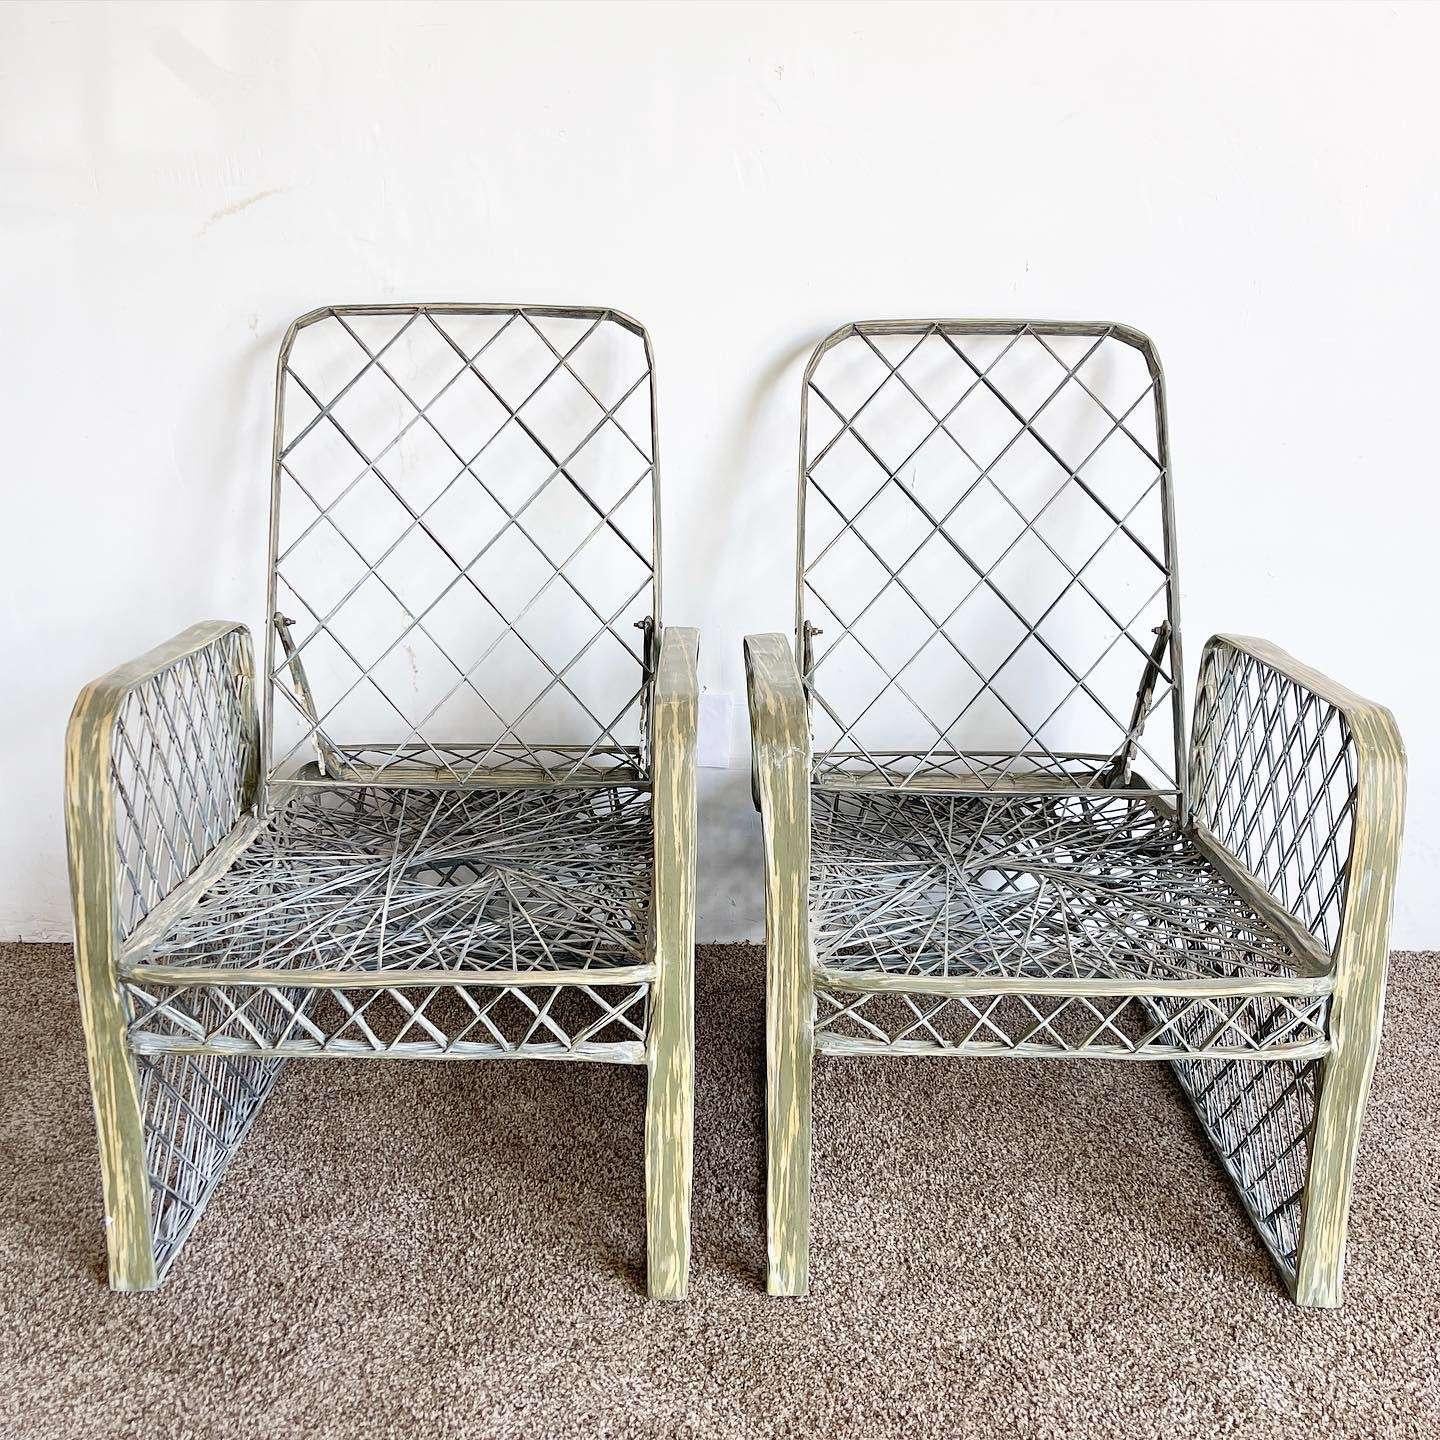 Exceptional vintage mid century modern Russell Woodard spun fiberglass patio set. Features to lounge chairs with adjustable back rests, one small hourglass side table and a pair of rounded square ottomans.

Ottomans measure: 22”w, 22”d, 15”h
Table